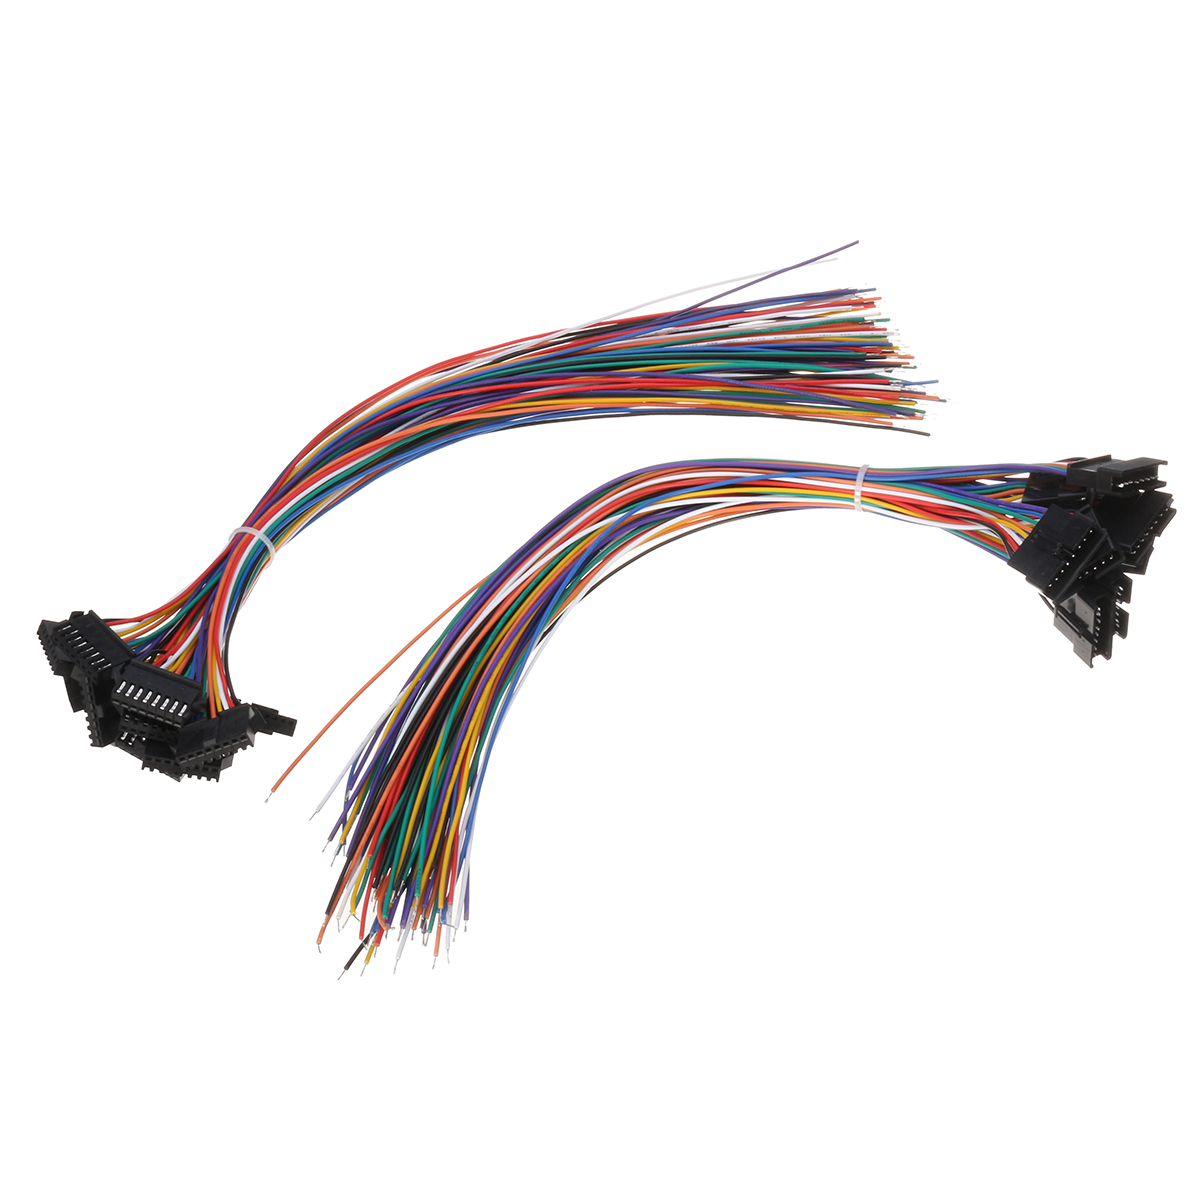 10-Set-Jst-25mm-SM-8-Pin-Male--Female-Connector-Plug-With-Wire-Cable-300mm-1170148-2